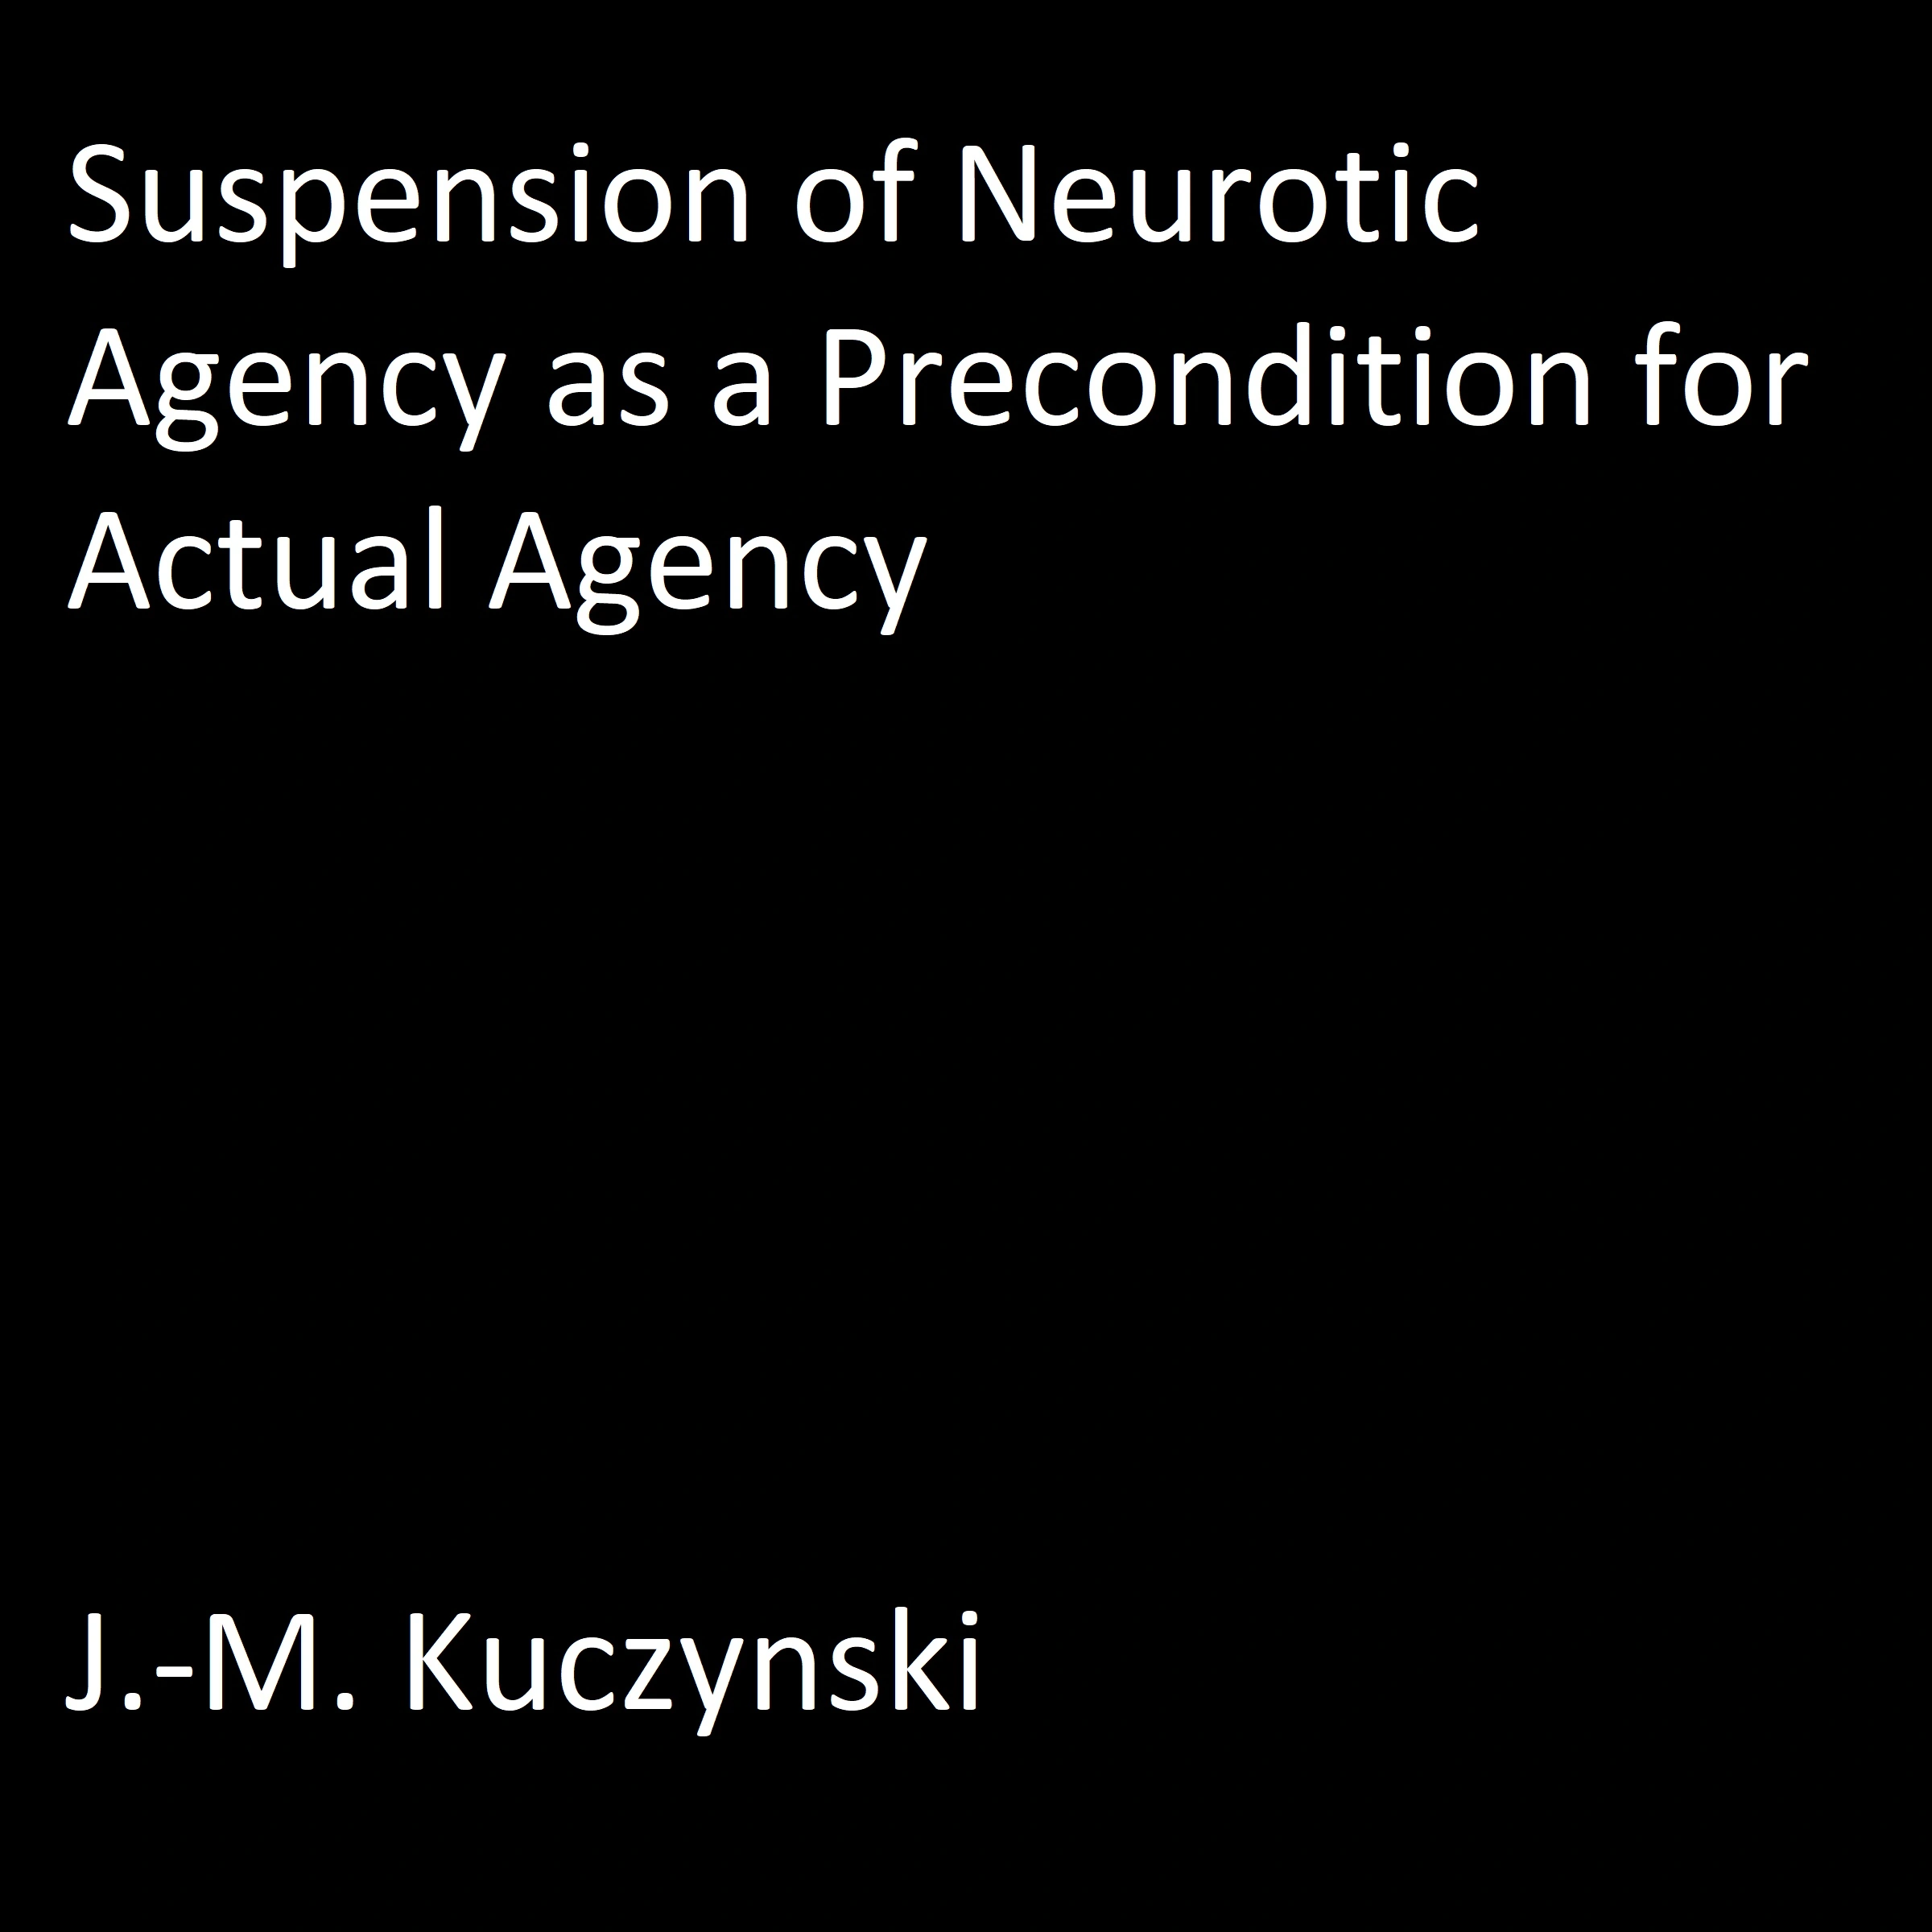 Suspension of Neurotic Agency as a Precondition for Actual Agency Audiobook by J.-M. Kuczynski